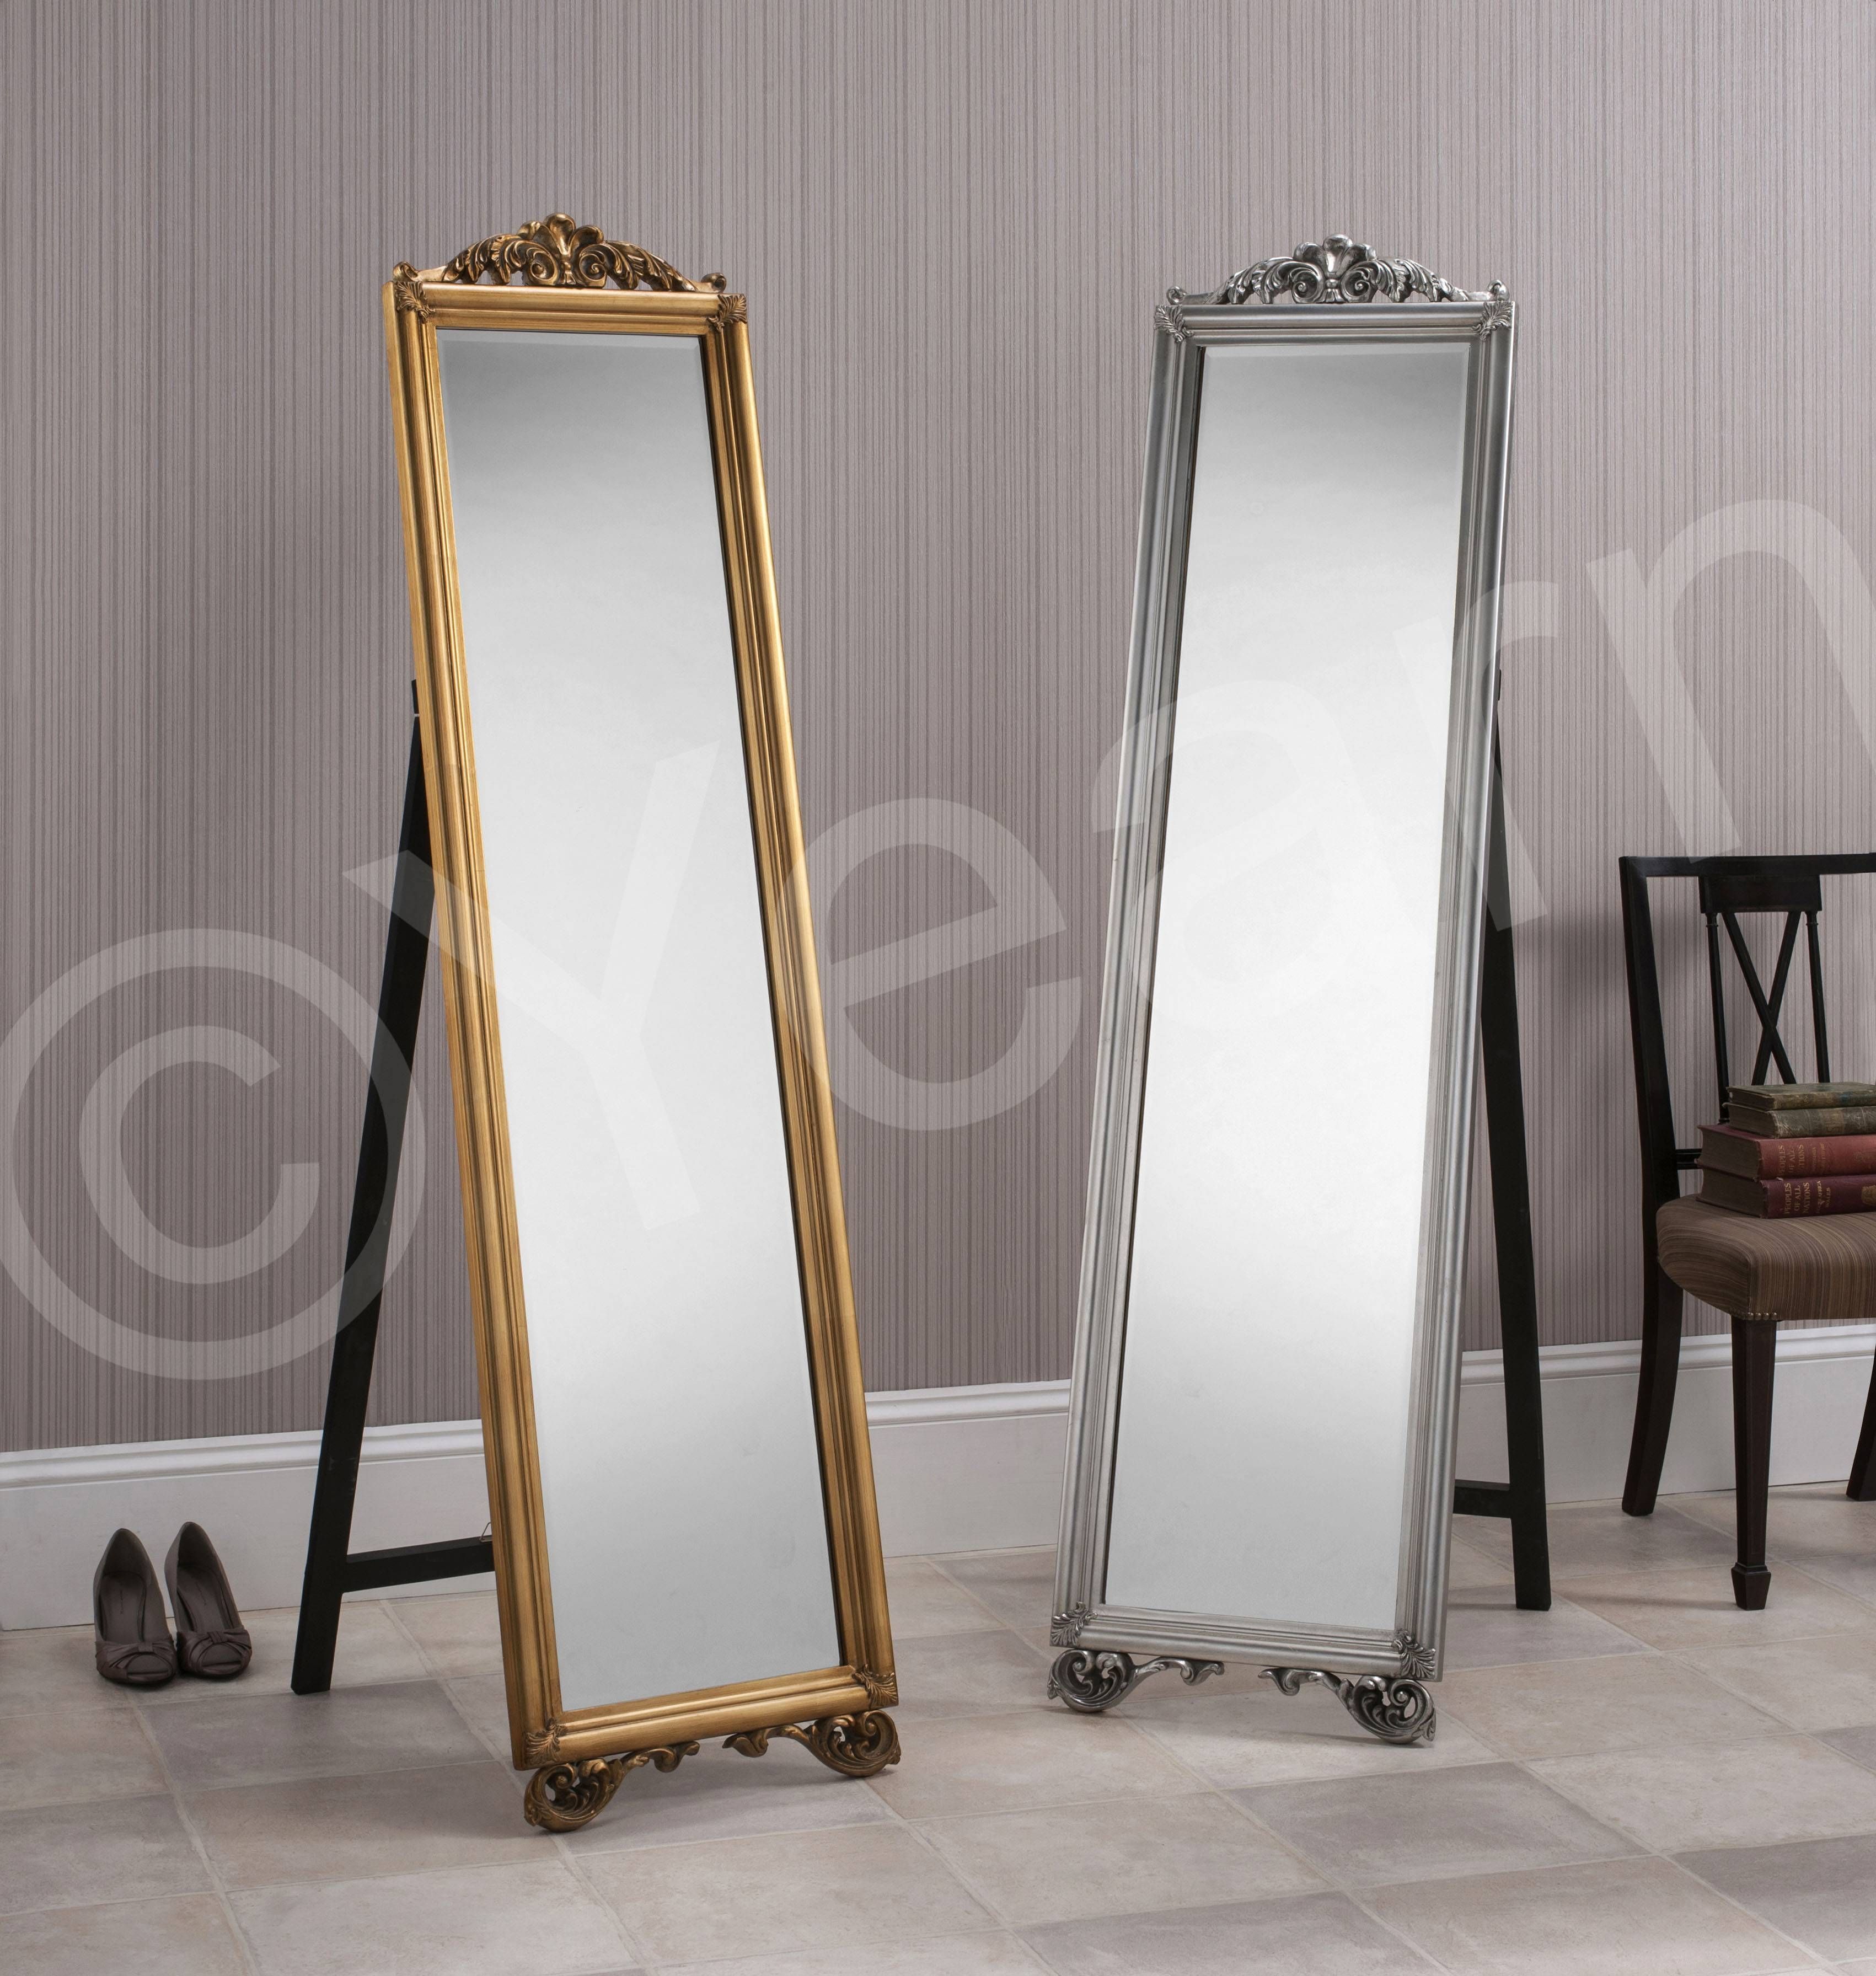 Freestanding Cheval Mirrors – Buy Online – Mirror Elegance Uk For Free Standing Silver Mirrors (View 10 of 15)